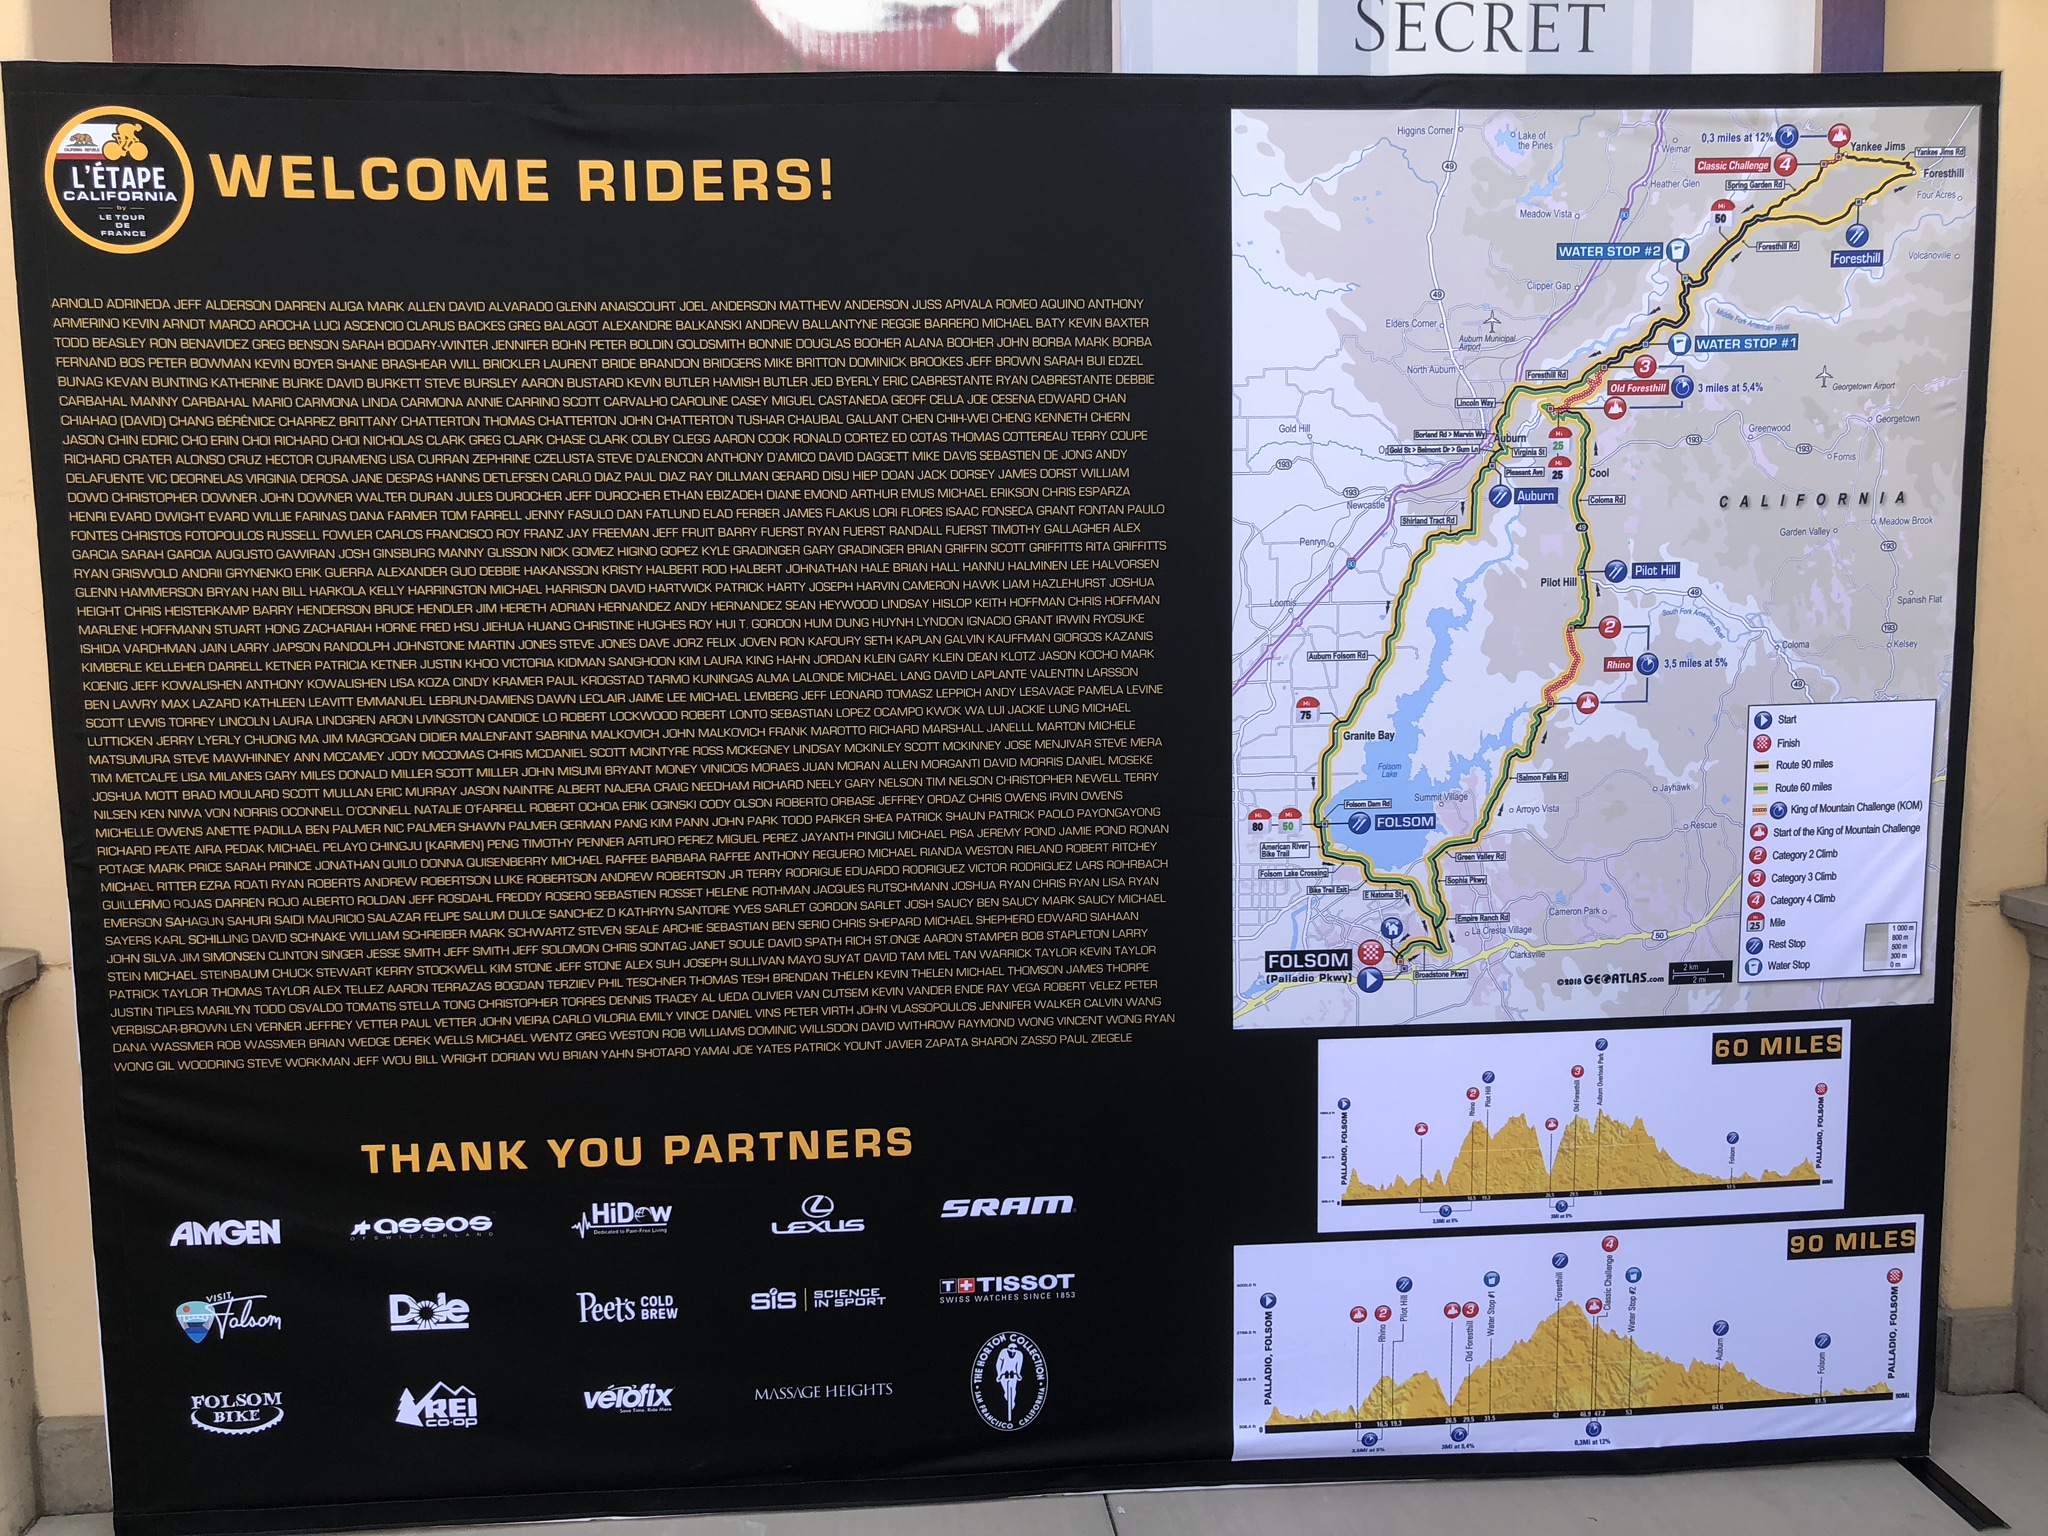 Map and names of all the riders